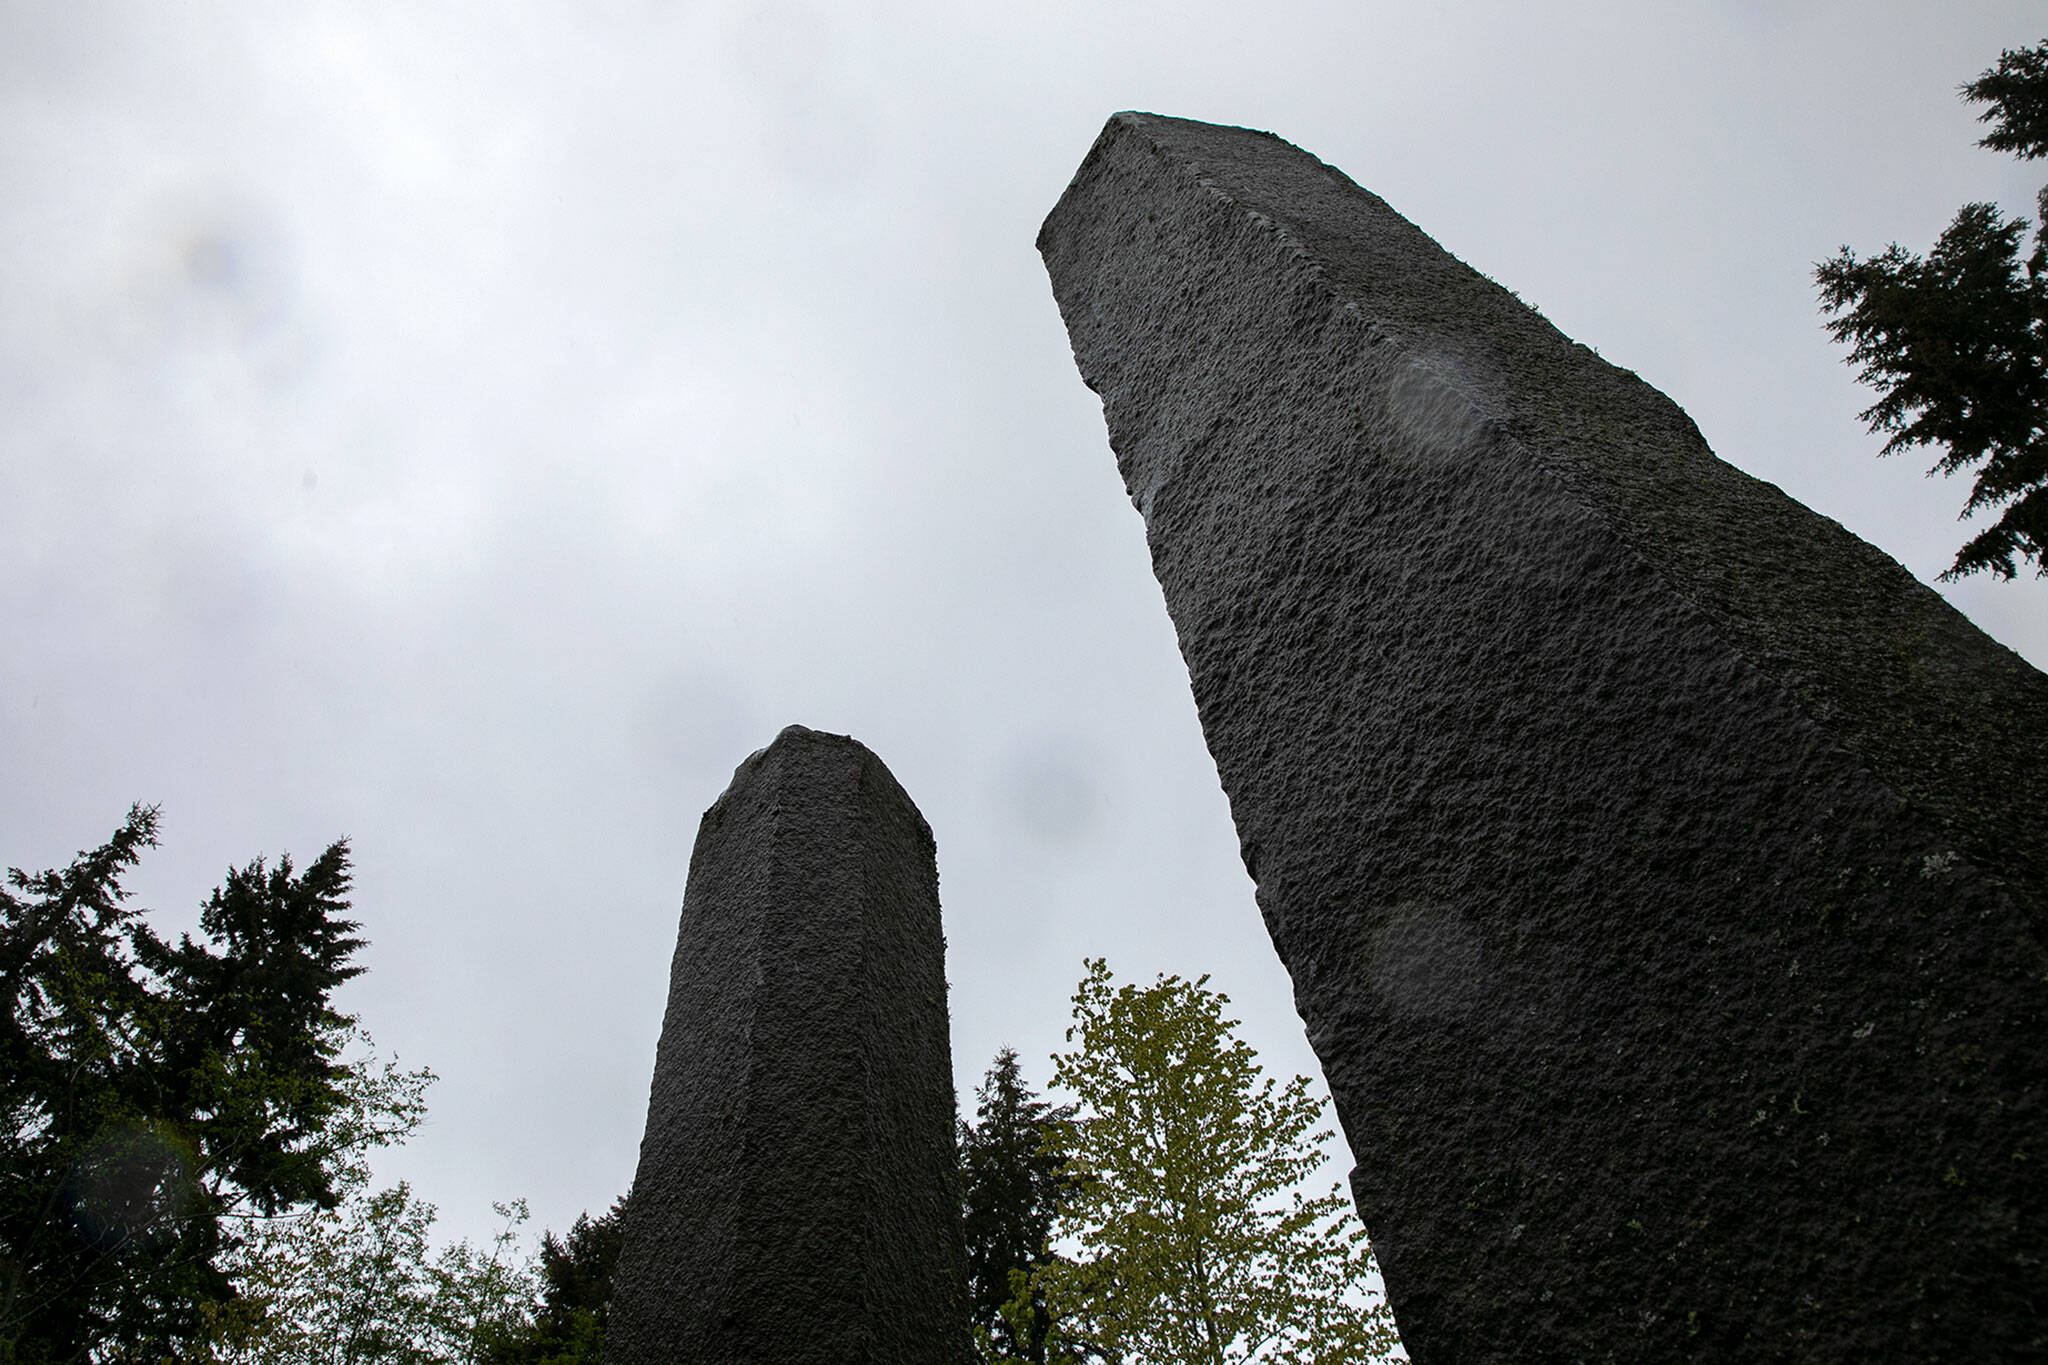 Two pillars of a stone circle tower over guests at Earth Sanctuary. (Ryan Berry / The Herald)